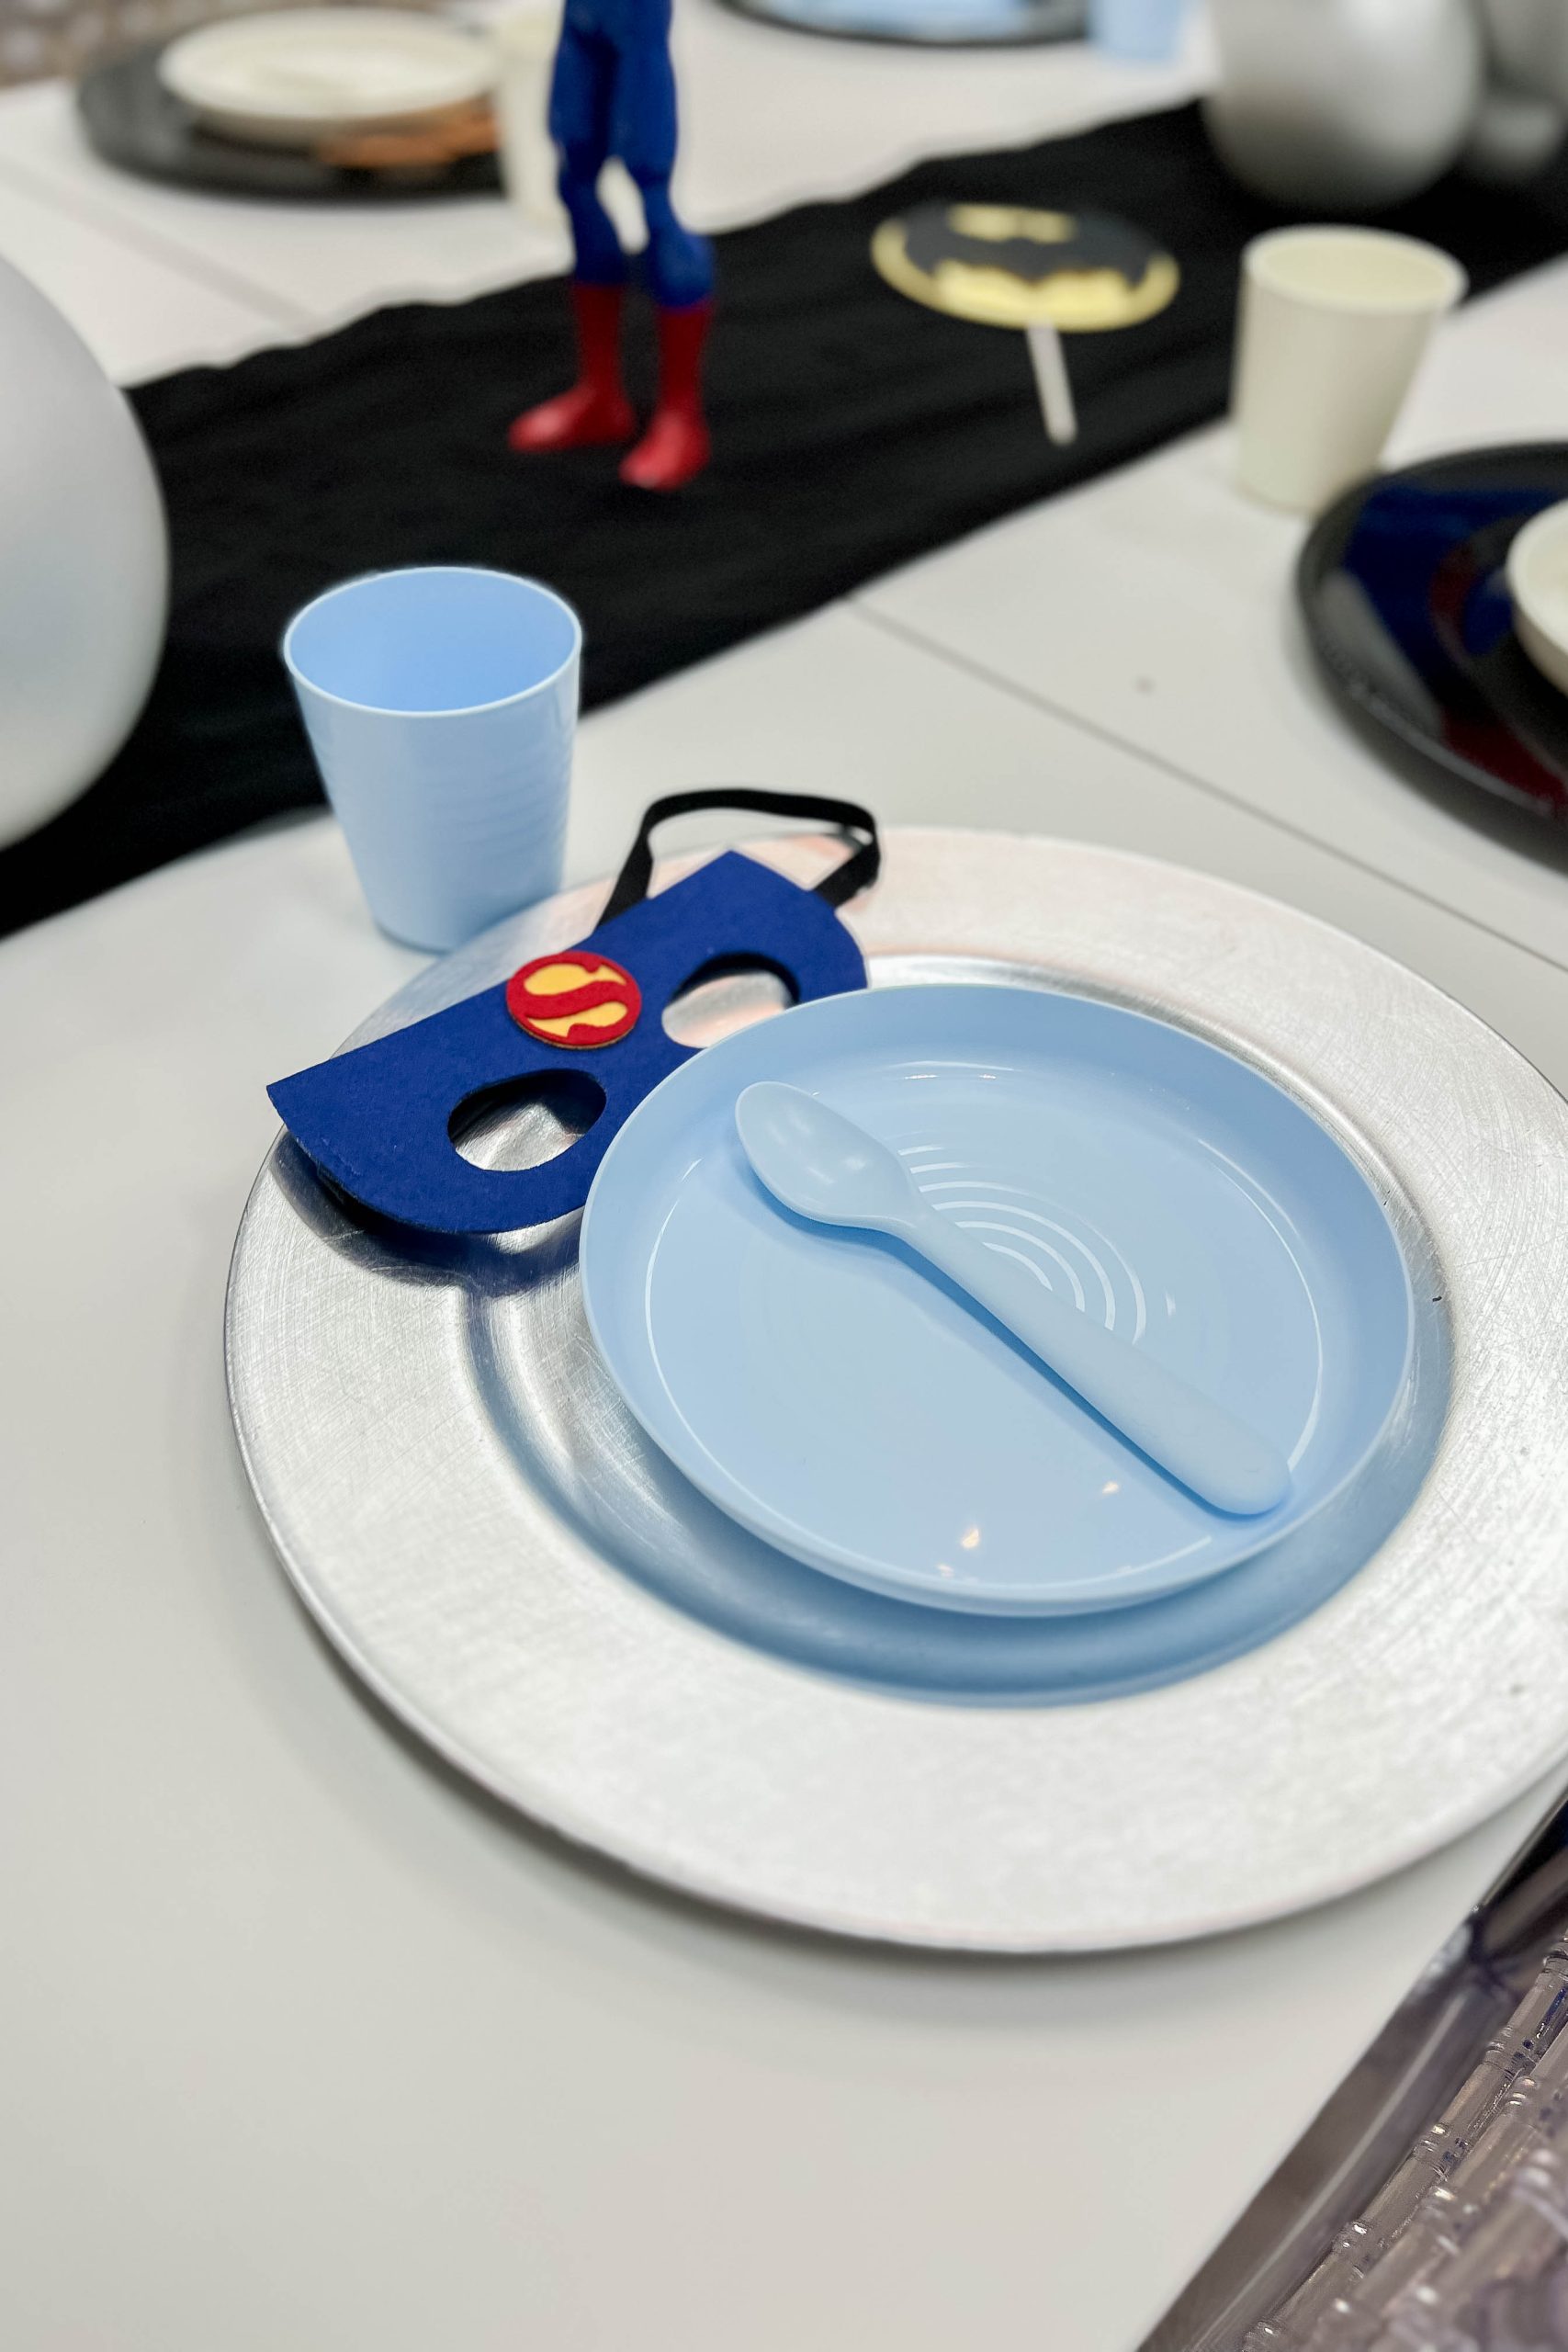 Throwing a Superhero-Themed Party is always tons of HEROIC fun! Take a look at our recent superhero bash for some inspiration for your upcoming celebrations.